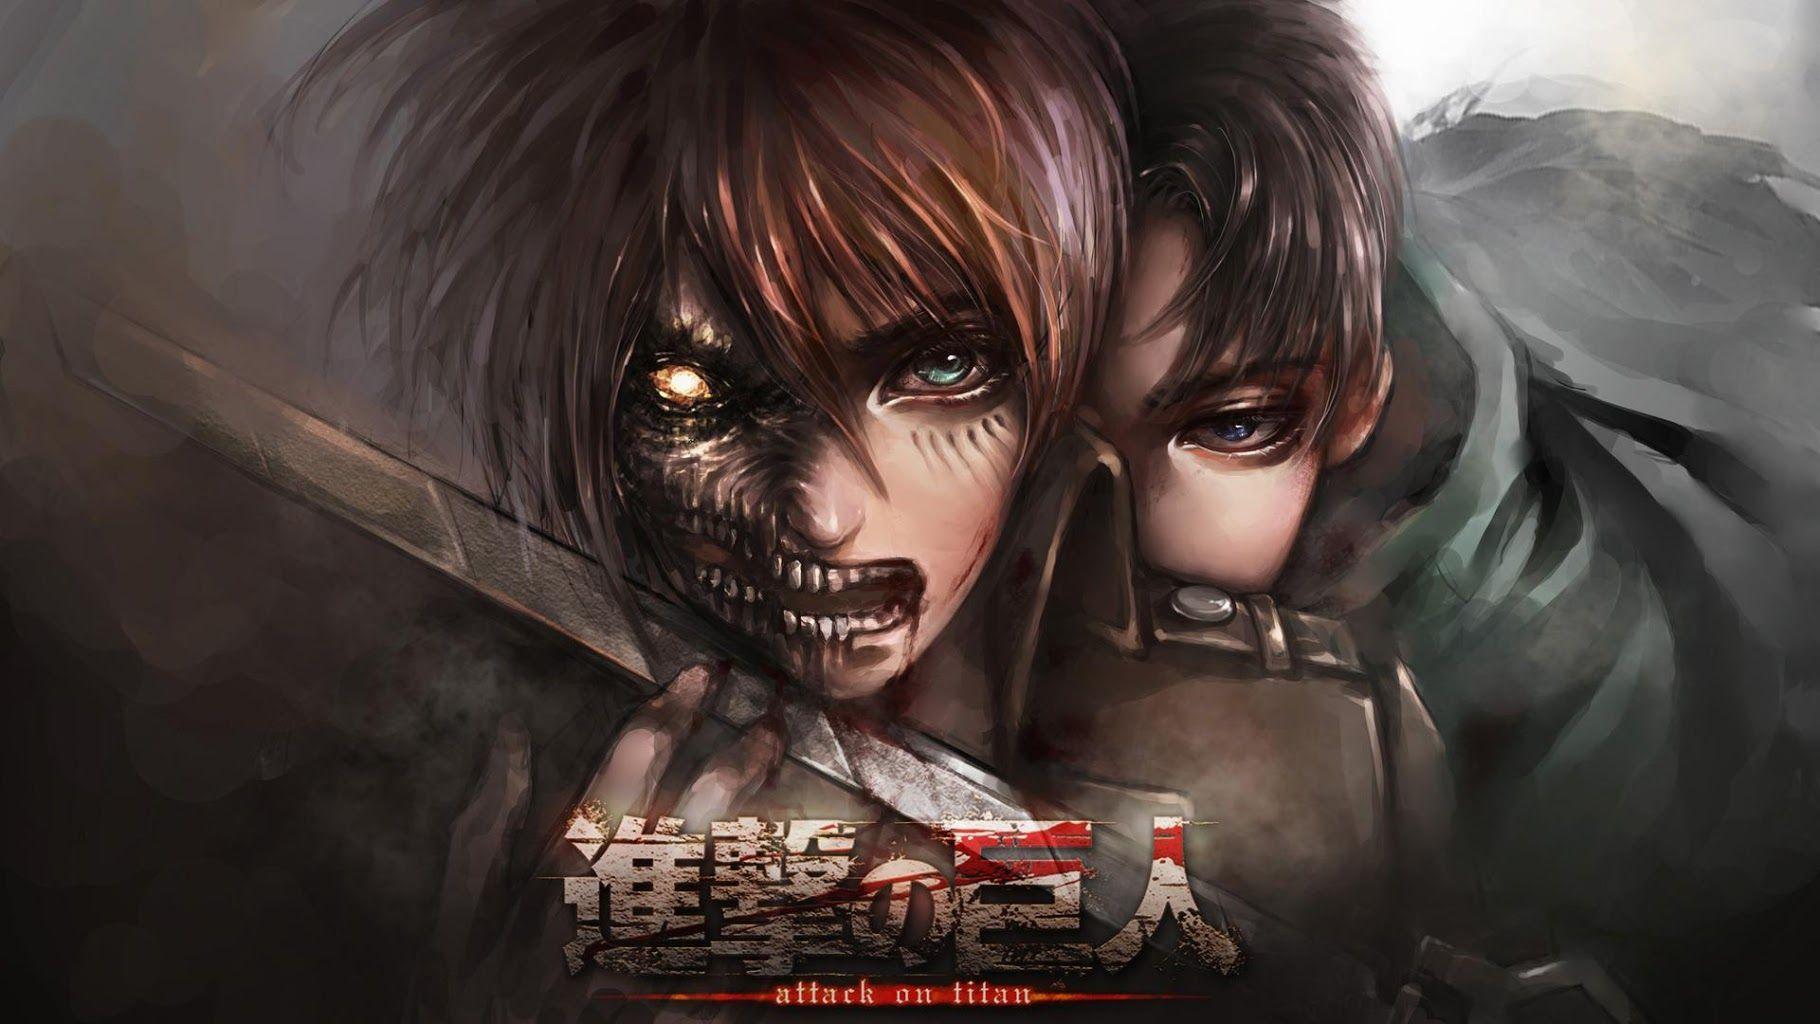 Attack On Titan Hd Wallpapers For Pc, Attack On Titan, Anime